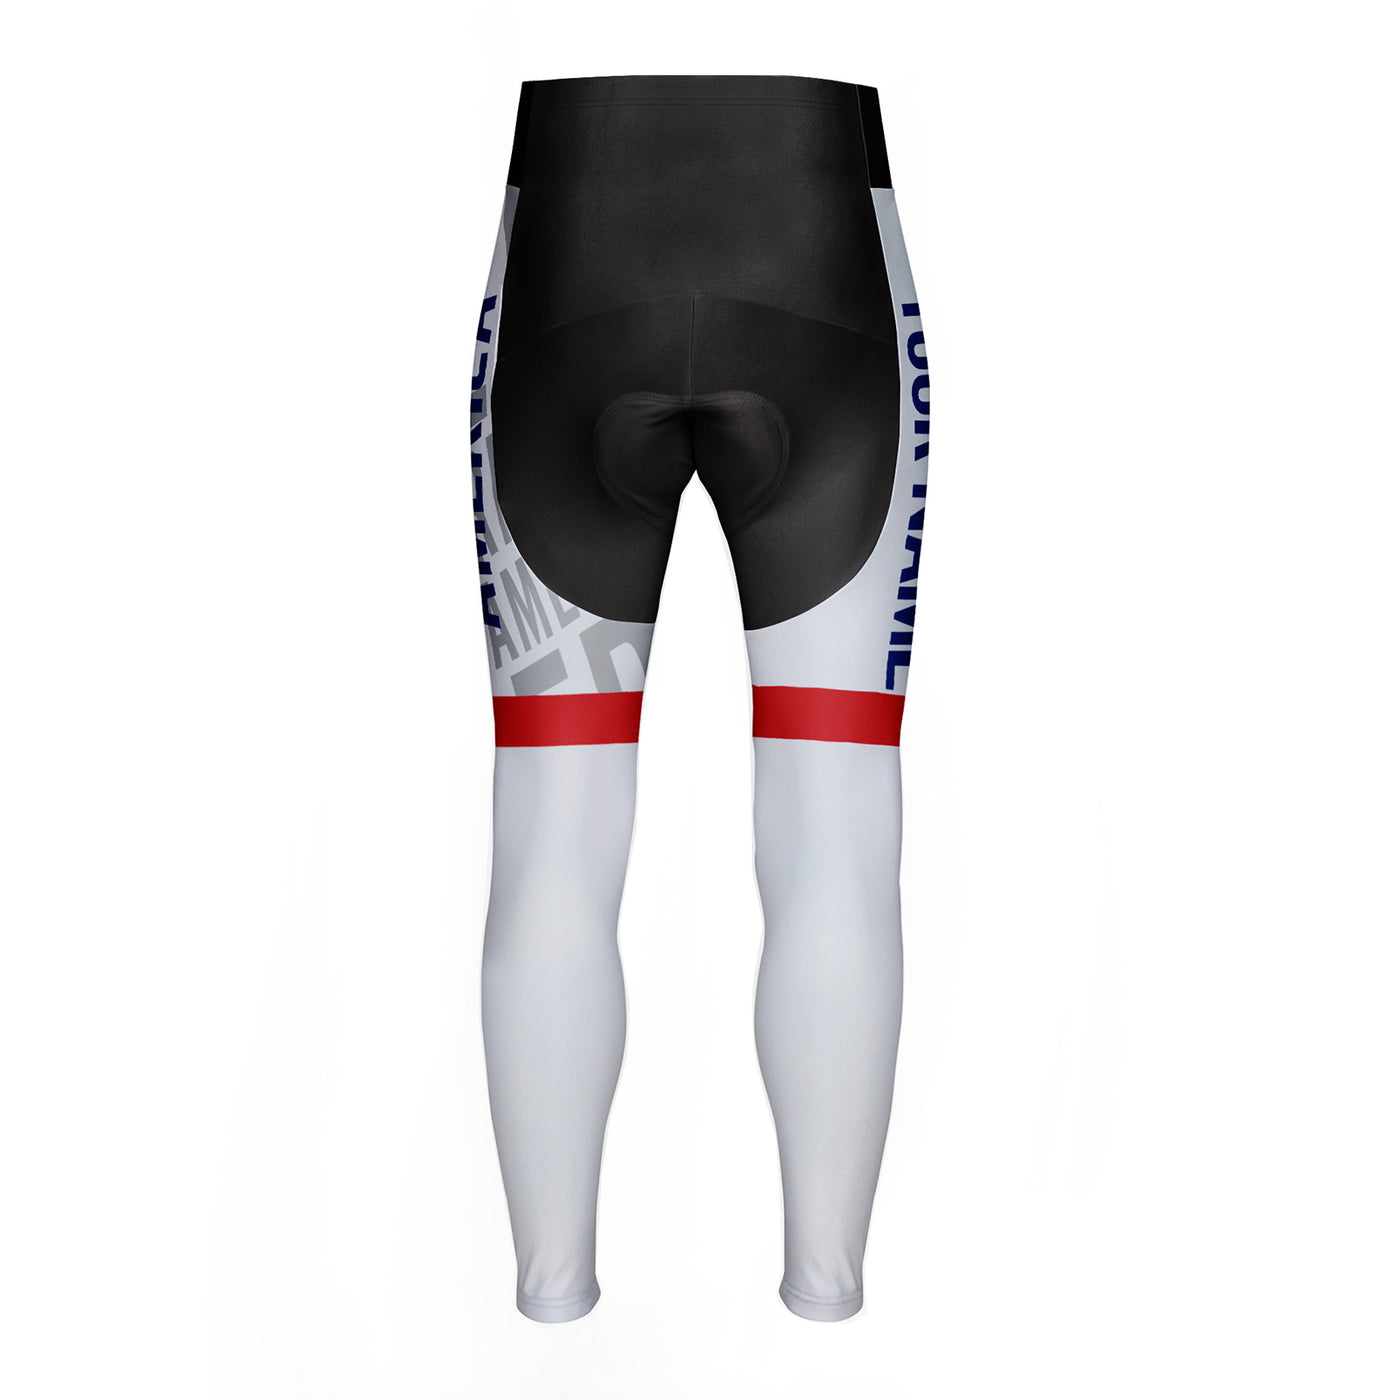 Customized America Unisex Cycling Tights Long Pants